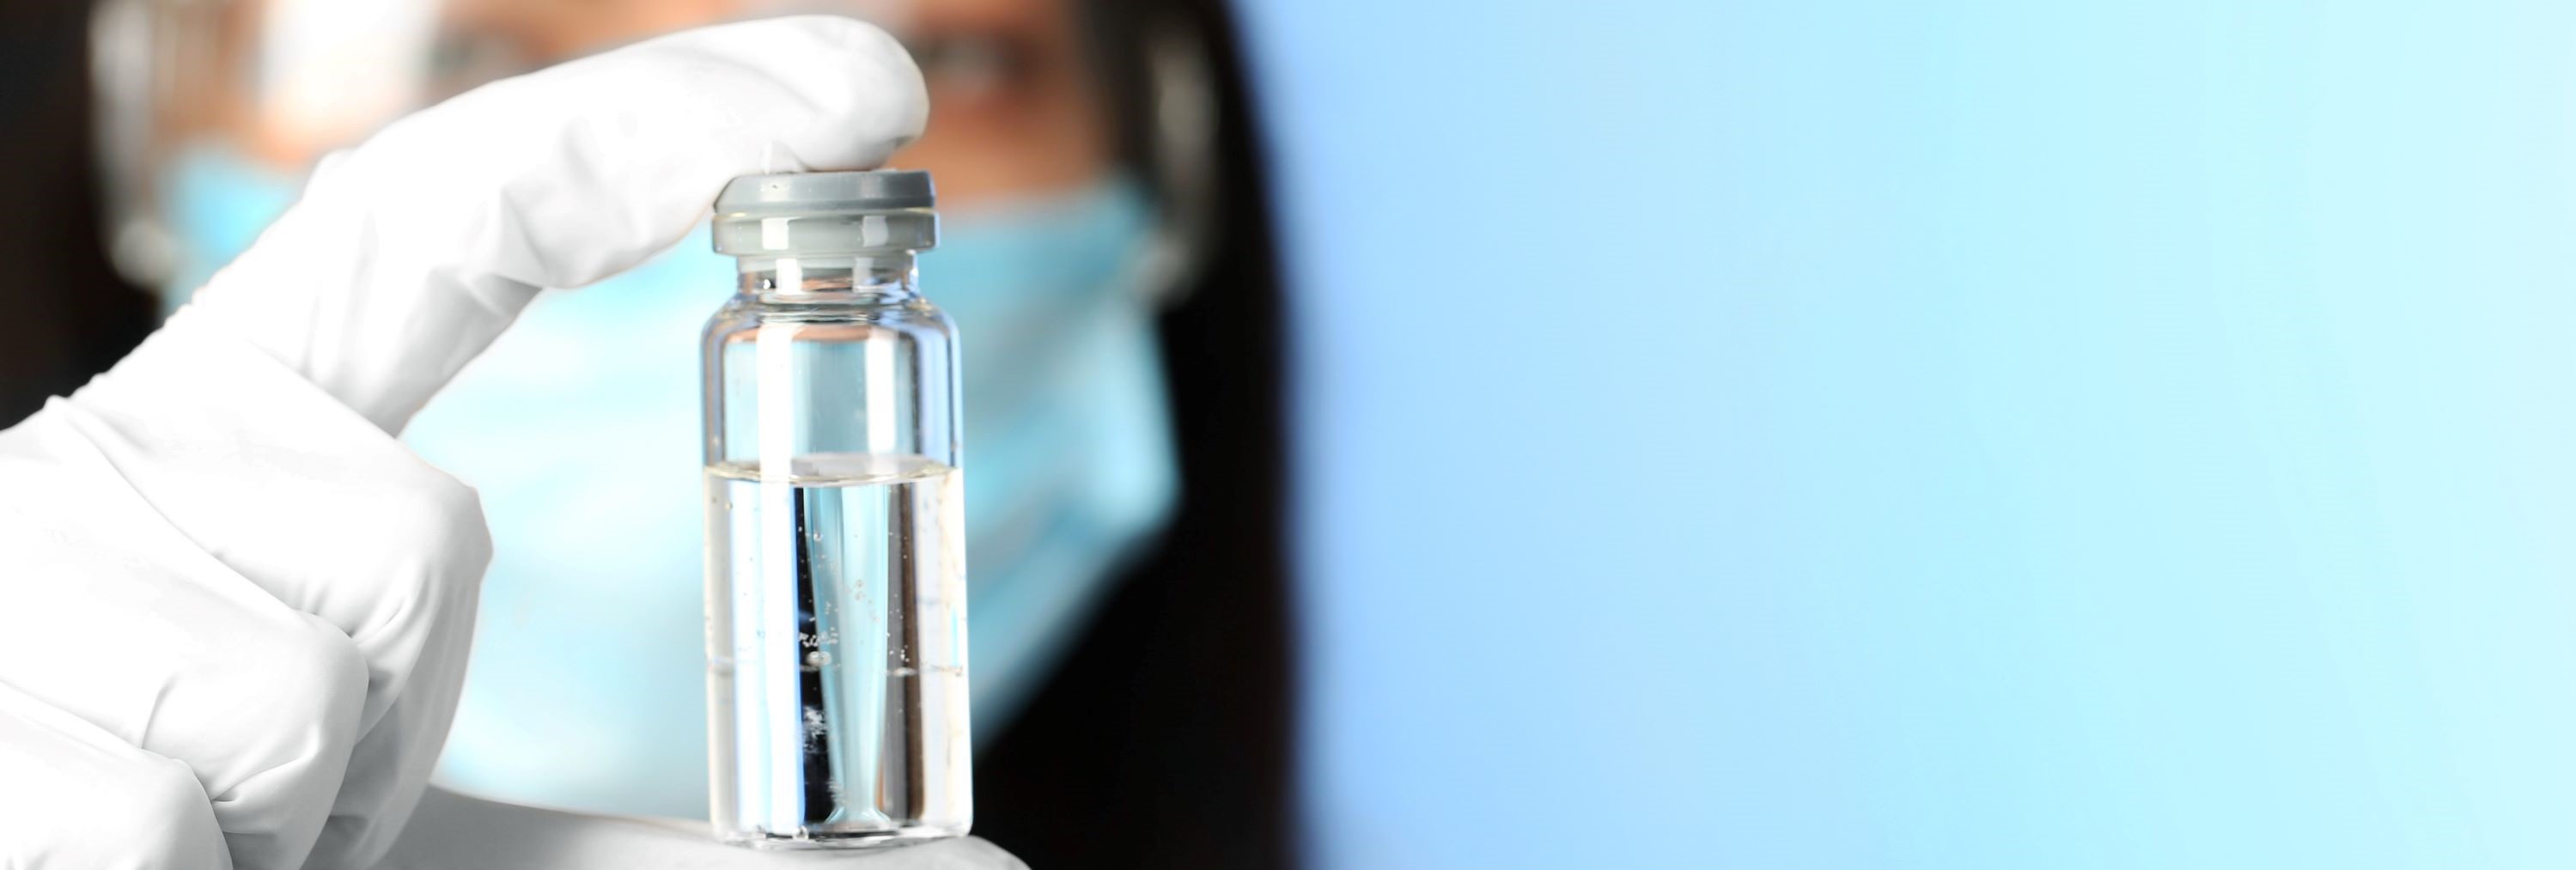 Scientist holding a vaccine vial